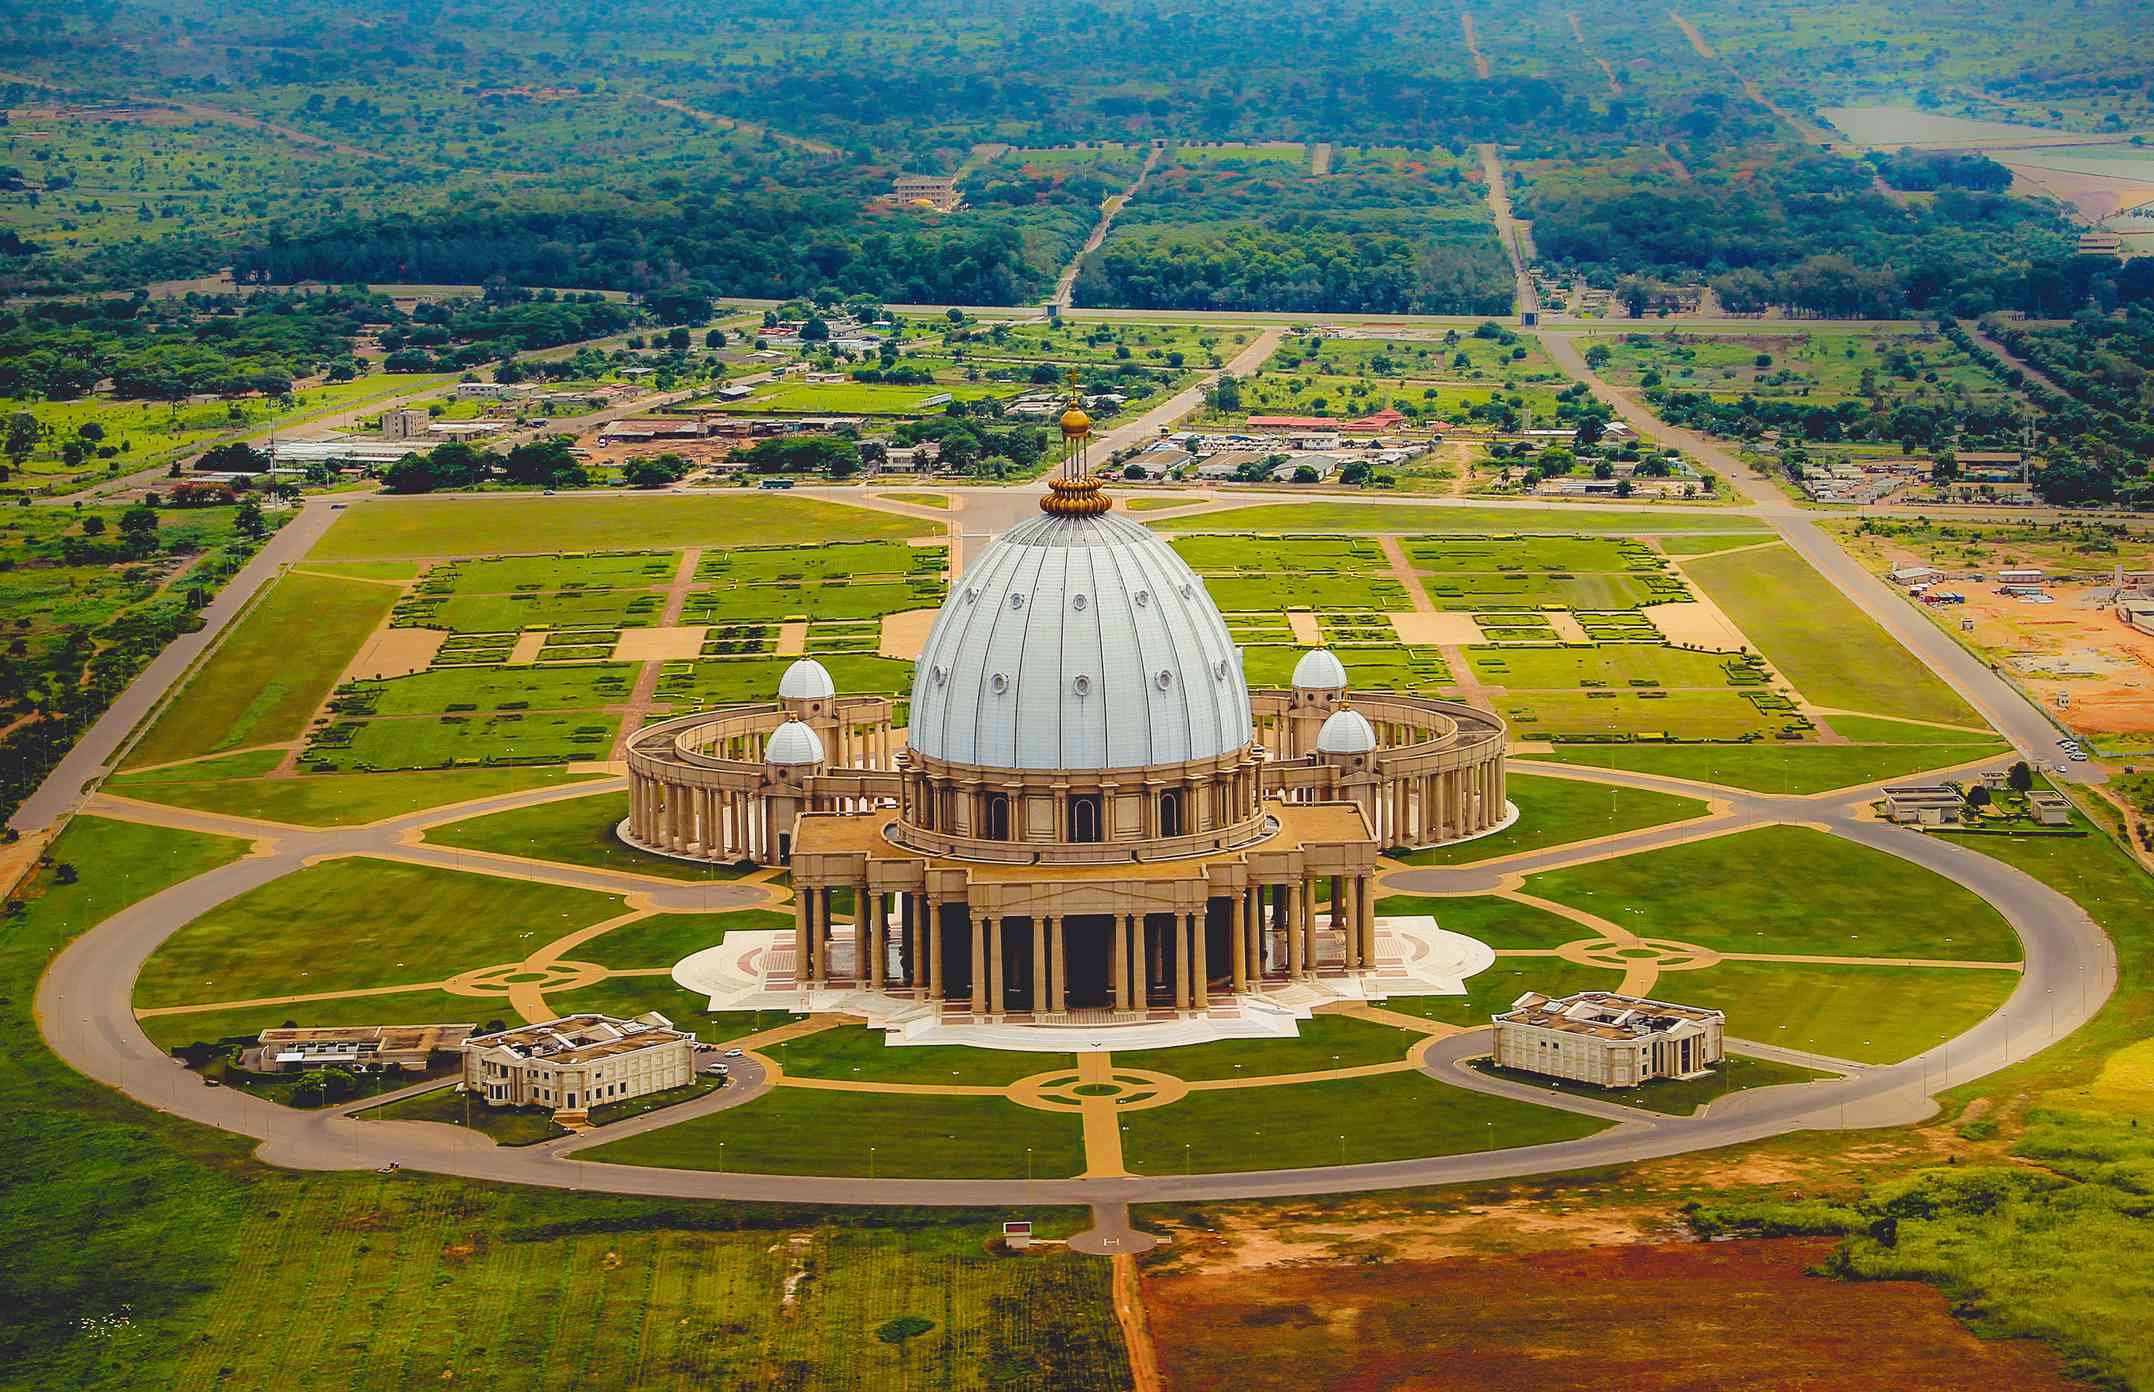 National monument of Ivory Coast - The Basilica of Our Lady of Peace